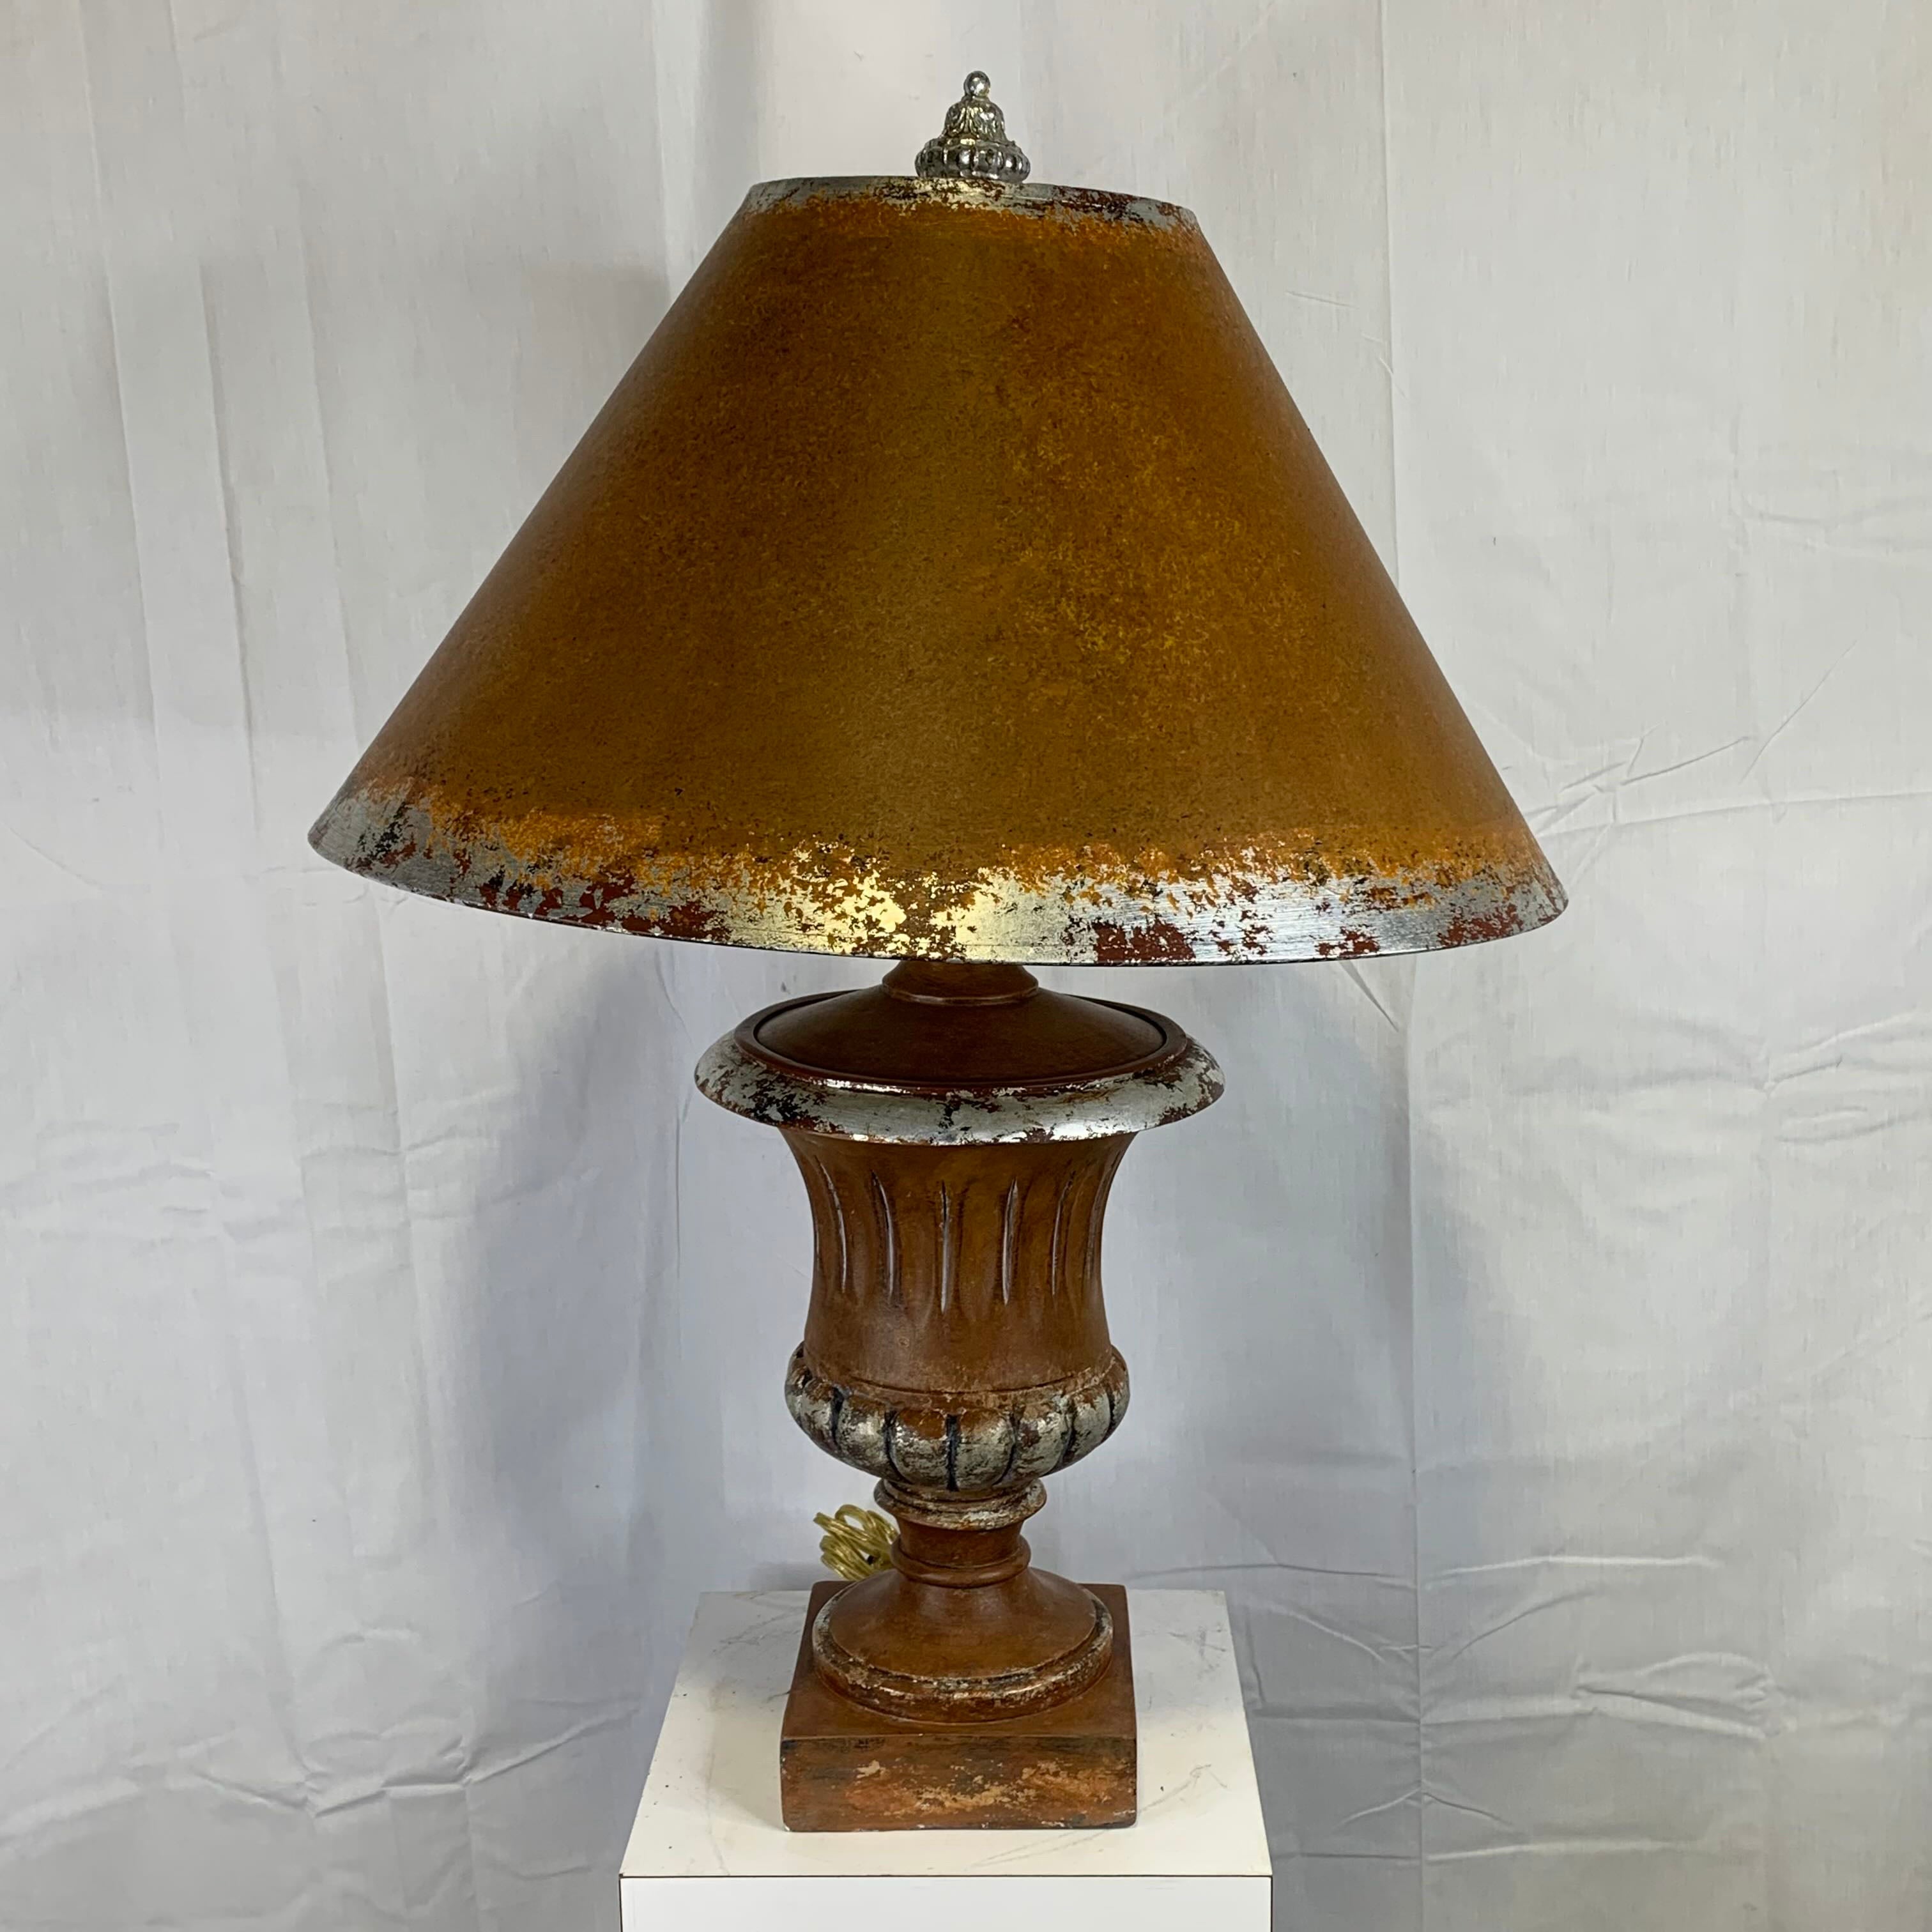 23" Diameter x 33" Distressed Brick Red with Silver Accent and Shade Table Lamp